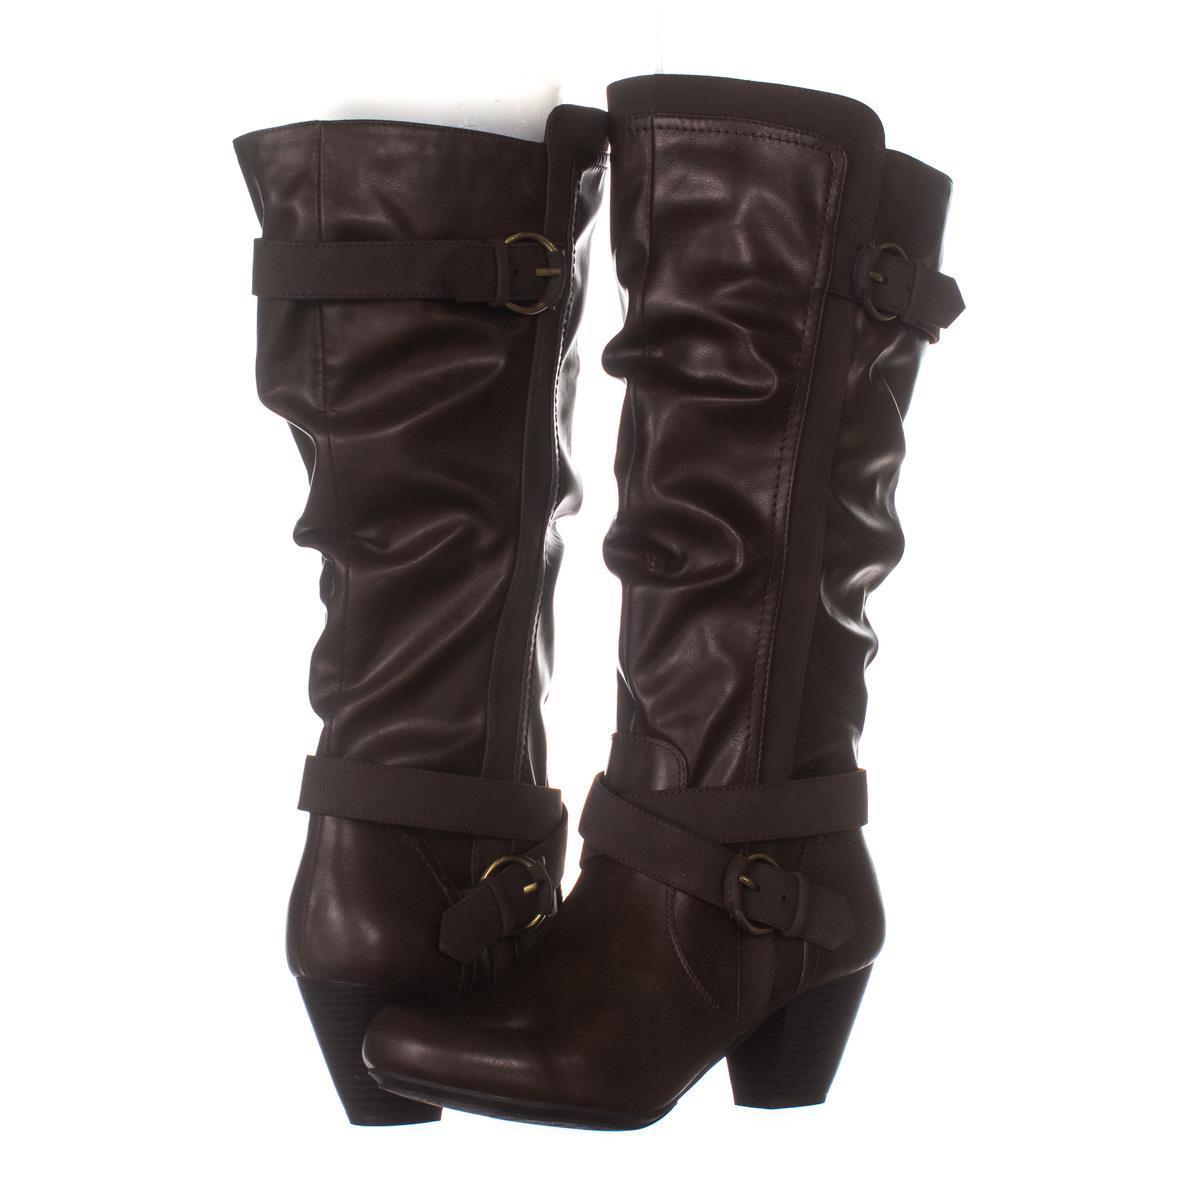 Rialto Crystal Knee High Slouch Boots 913 Brown 8 Us Boots 